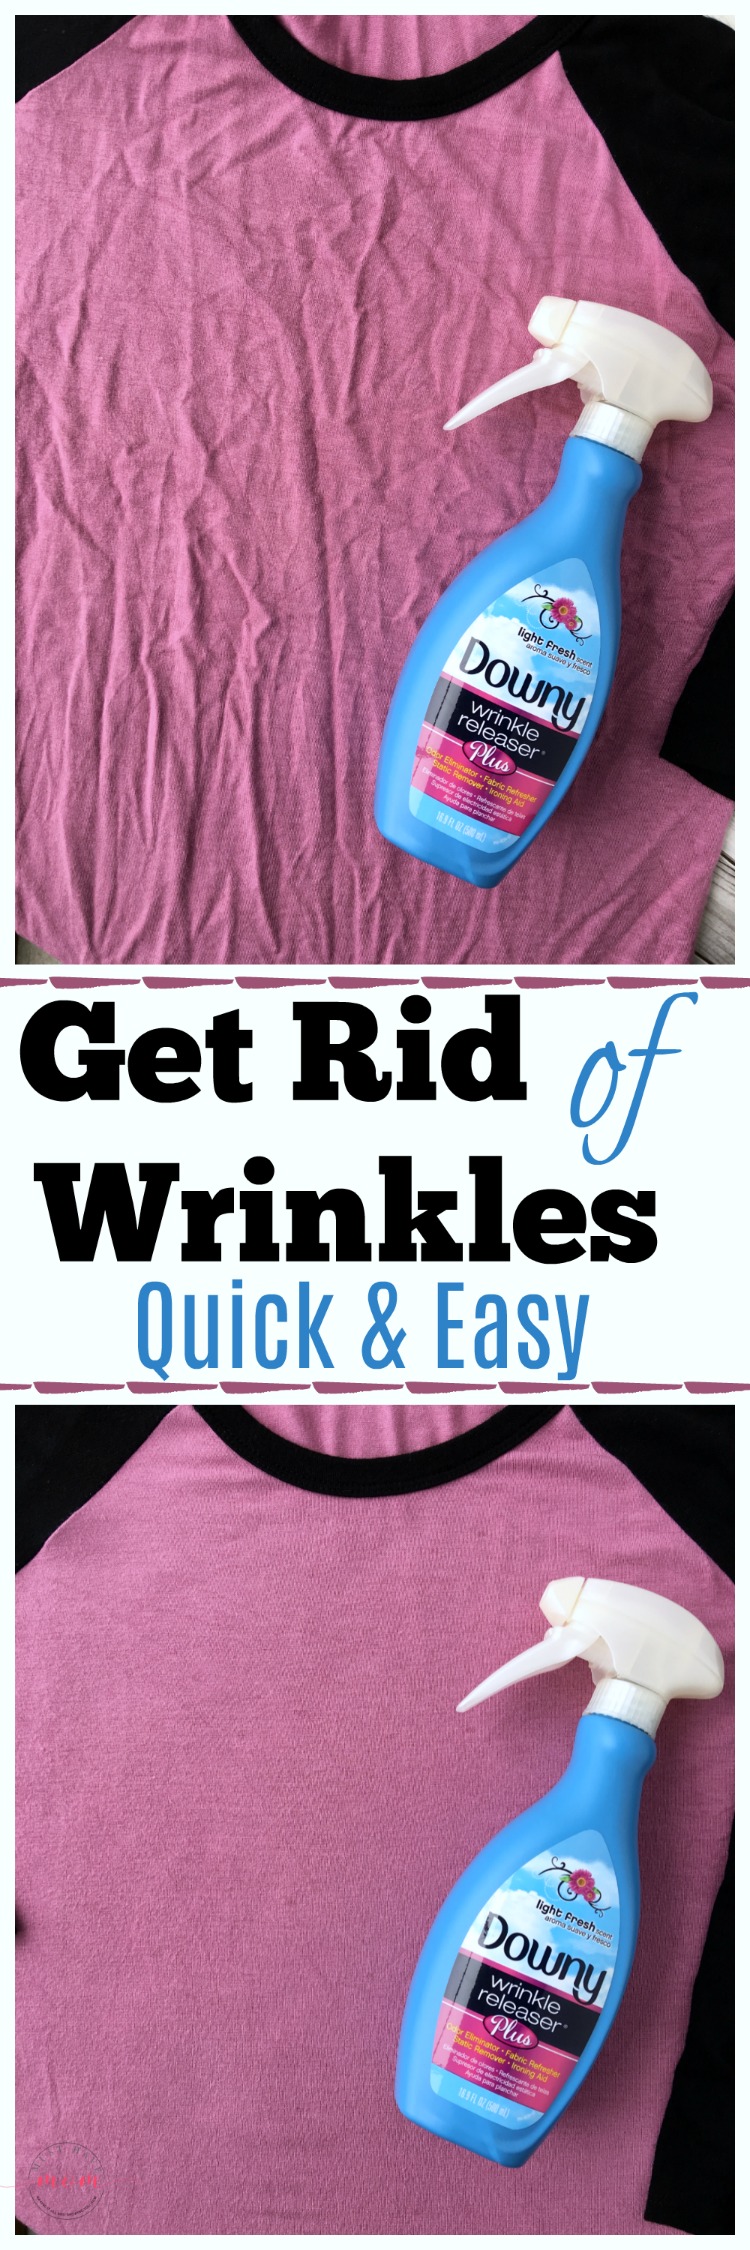 Laundry hacks every mom MUST know! How to get wrinkles out of clothes fast + make your own reusable dryer sheets!